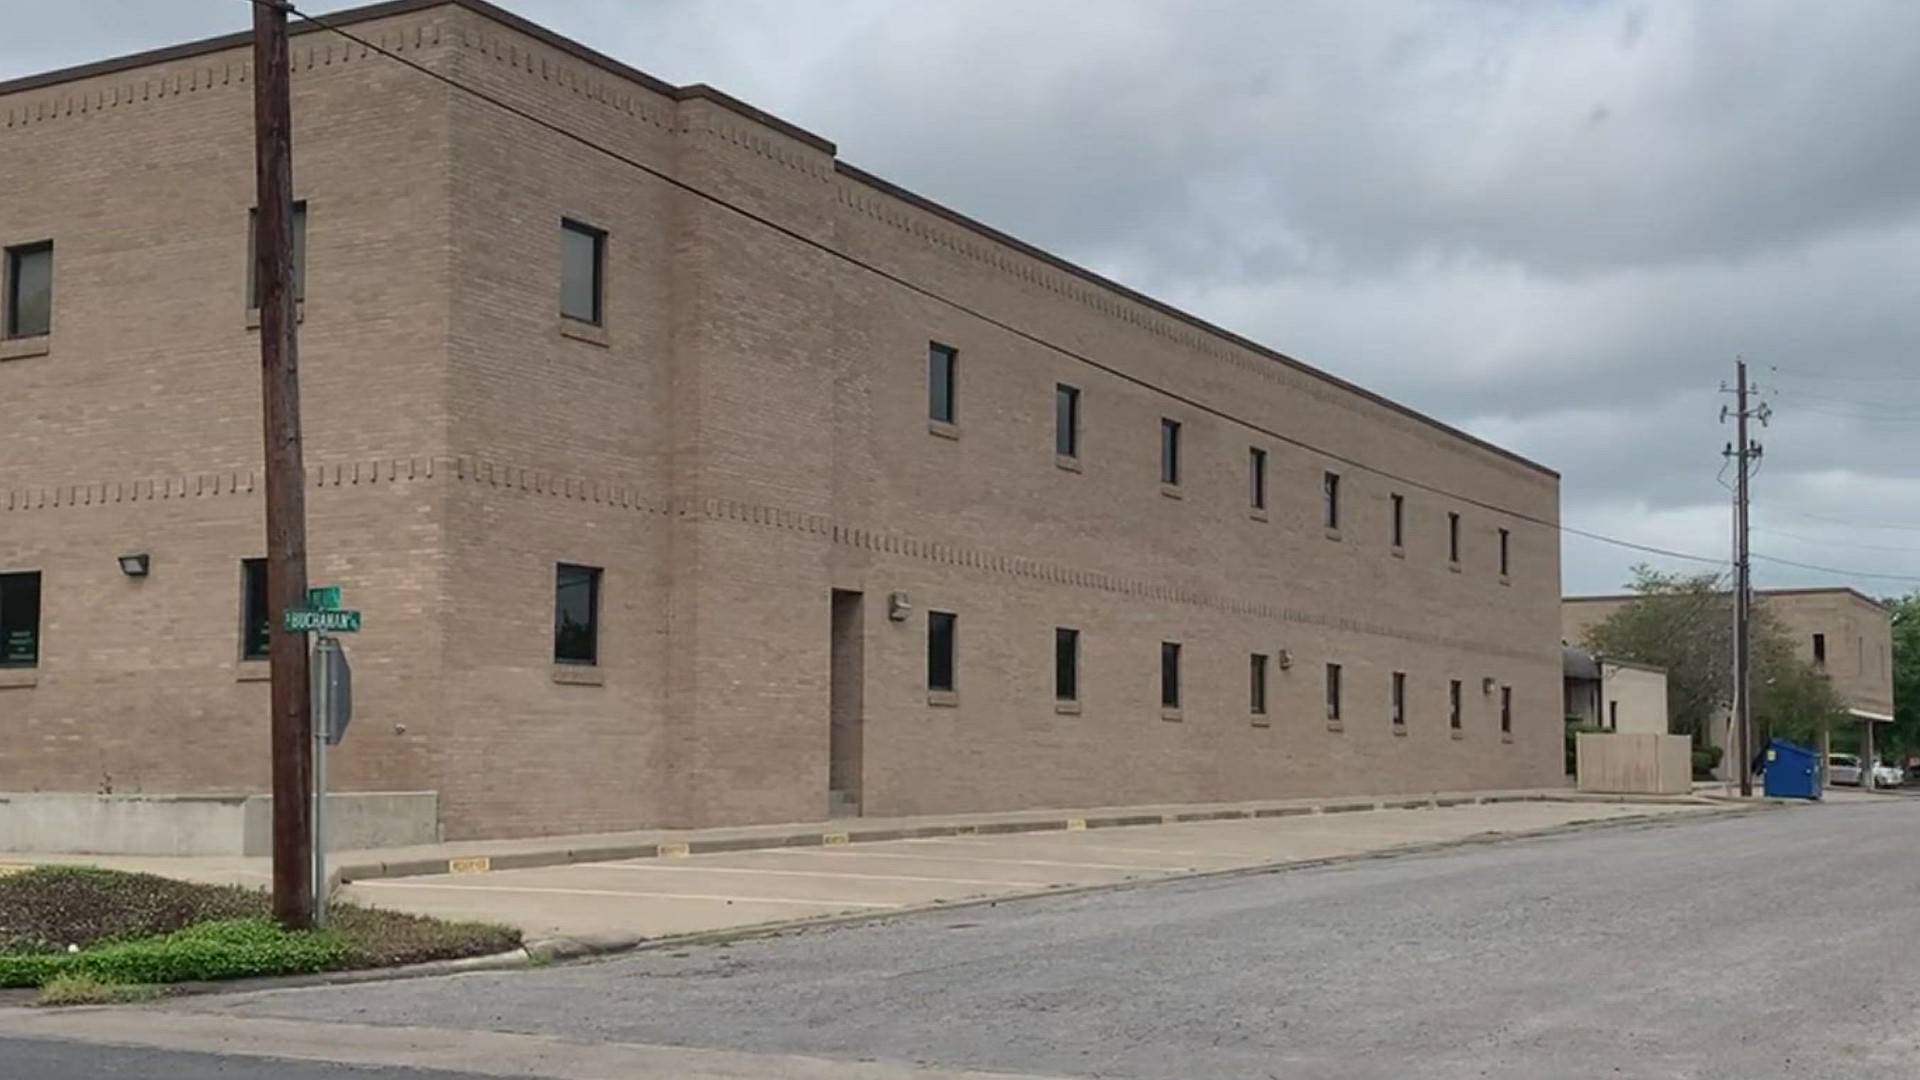 That after city officials announced they had bought the two story Dan Hughes oil company building to serve as the new city hall and police department.